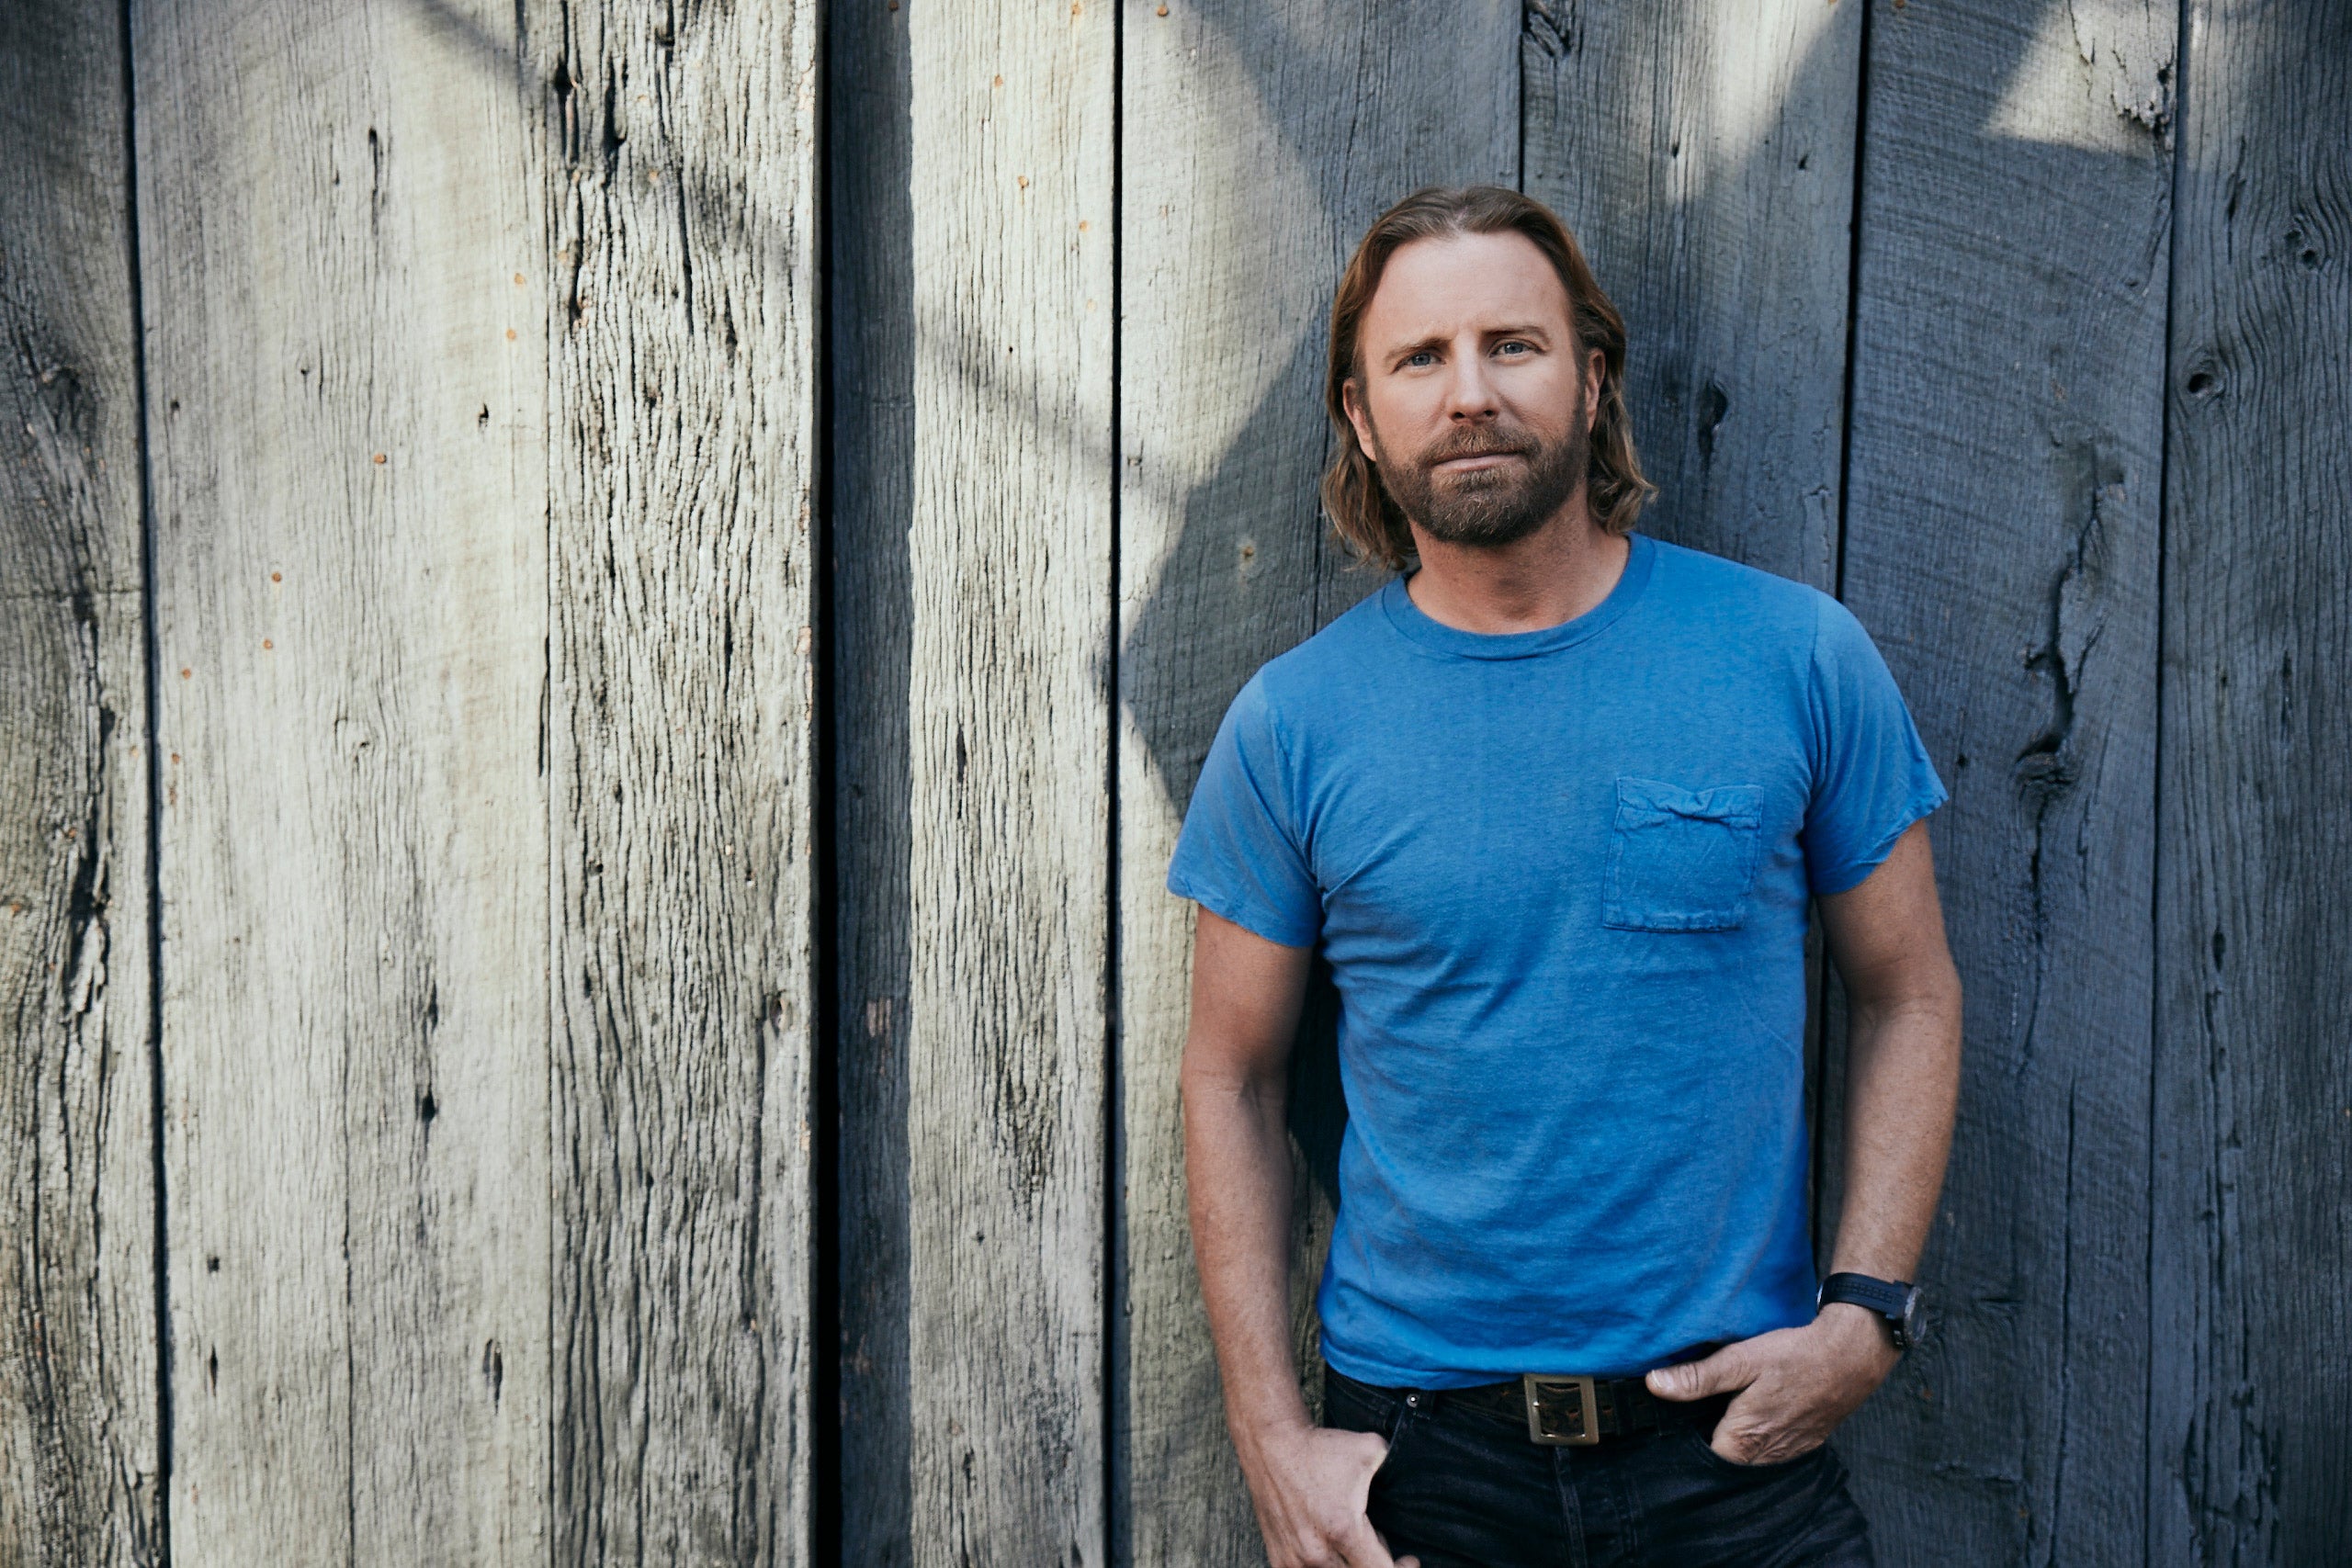 Dierks Bentley: Gravel & Gold Presented By Jersey Mikes presale code for advance tickets in Rogers